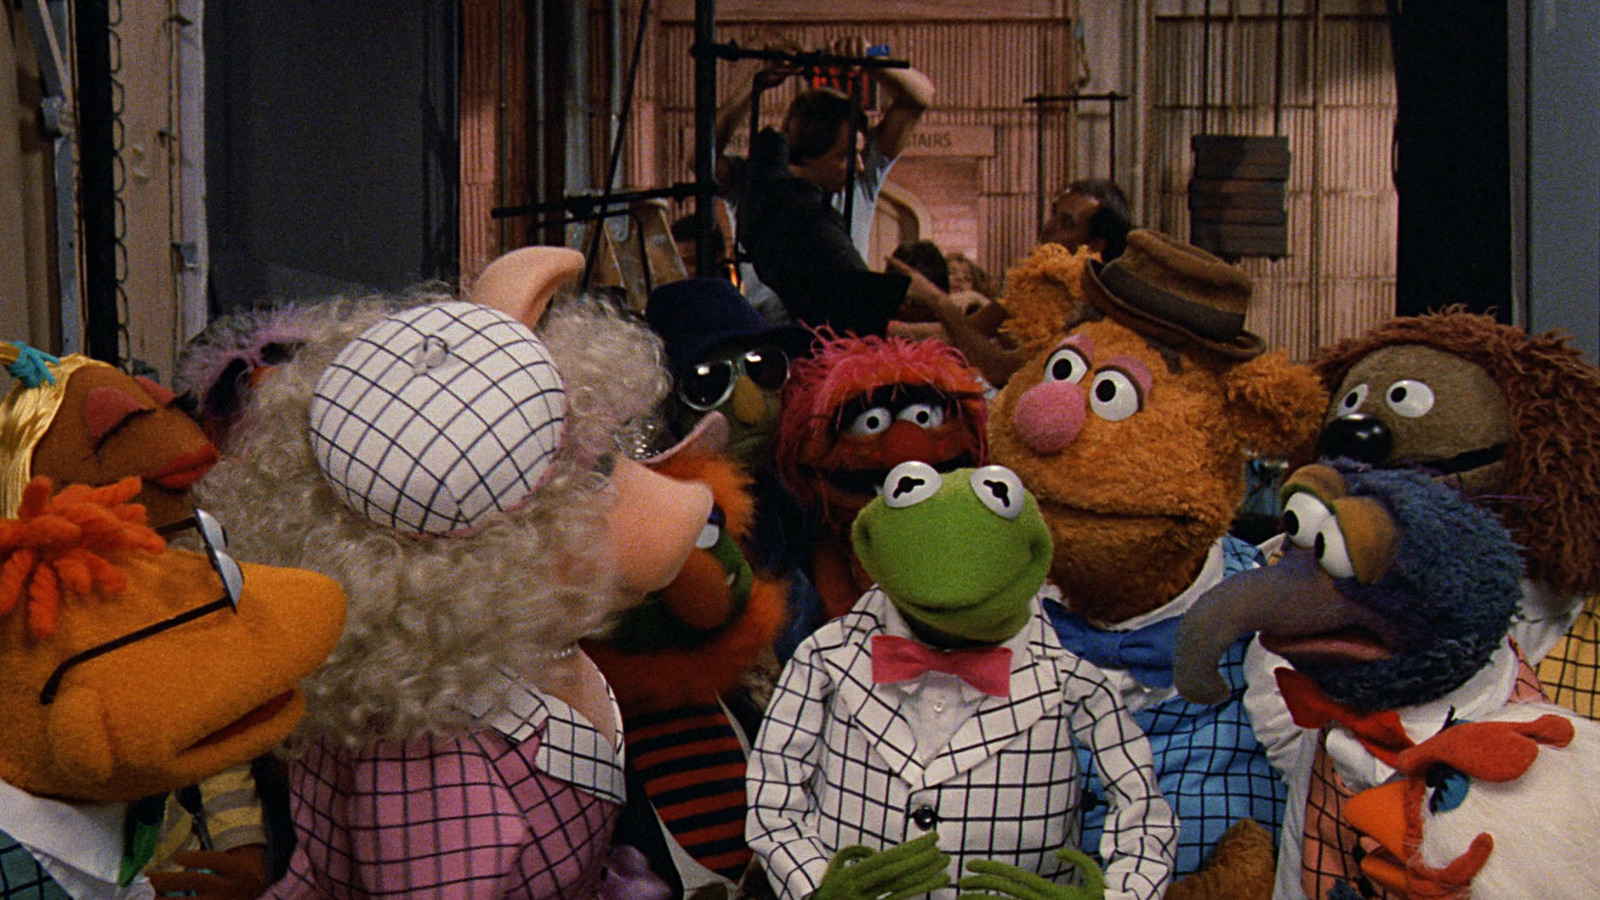 The Muppets Take Manhattan Comes In 4K With New Frank Oz Commentary Track